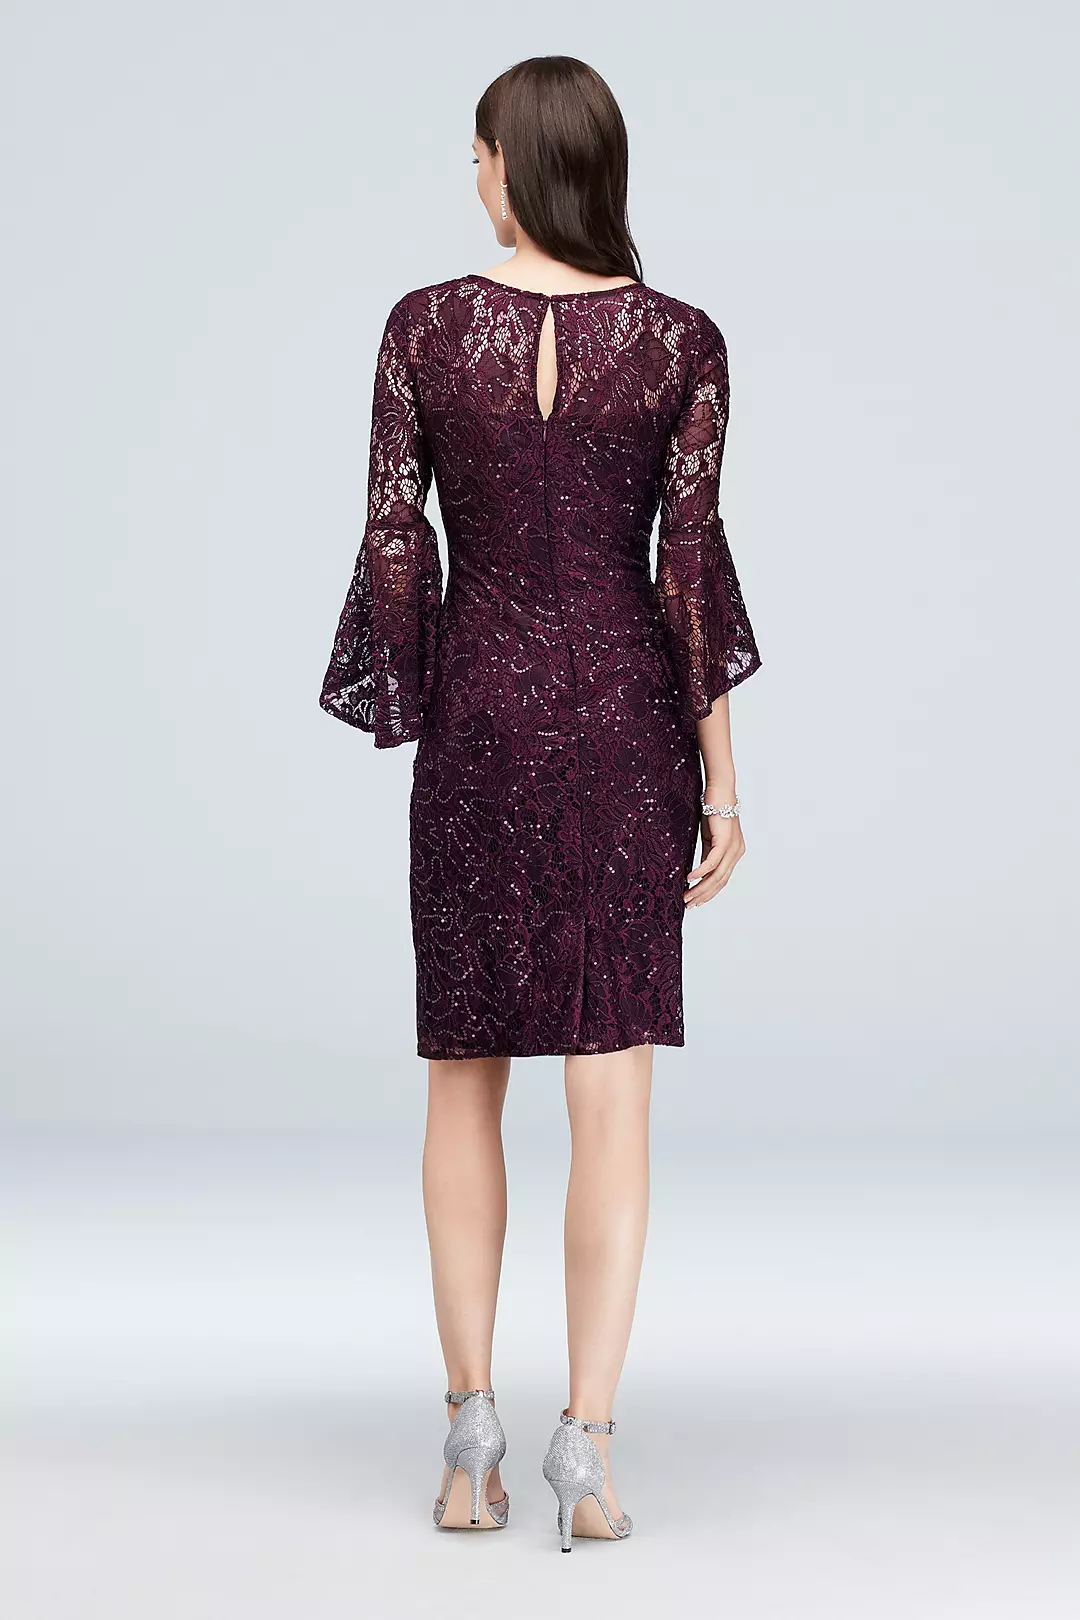 Draped Bell Sleeve Glitter Lace Cocktail Dress Image 2